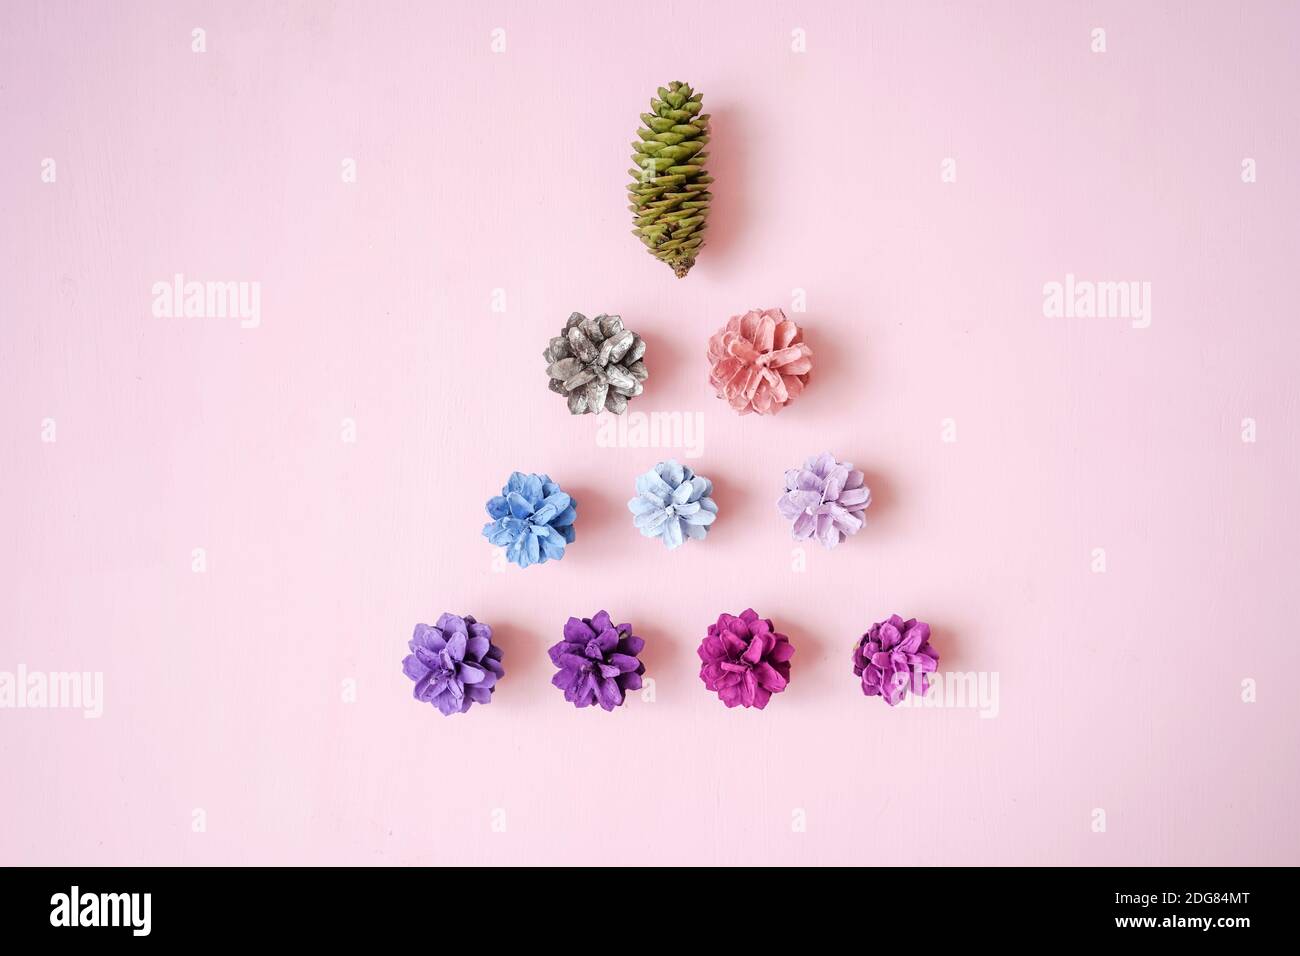 Christmas tree from Multi-colored pine cones on pink background, top view. Christmas and new year concept. Flat lay style. Stock Photo